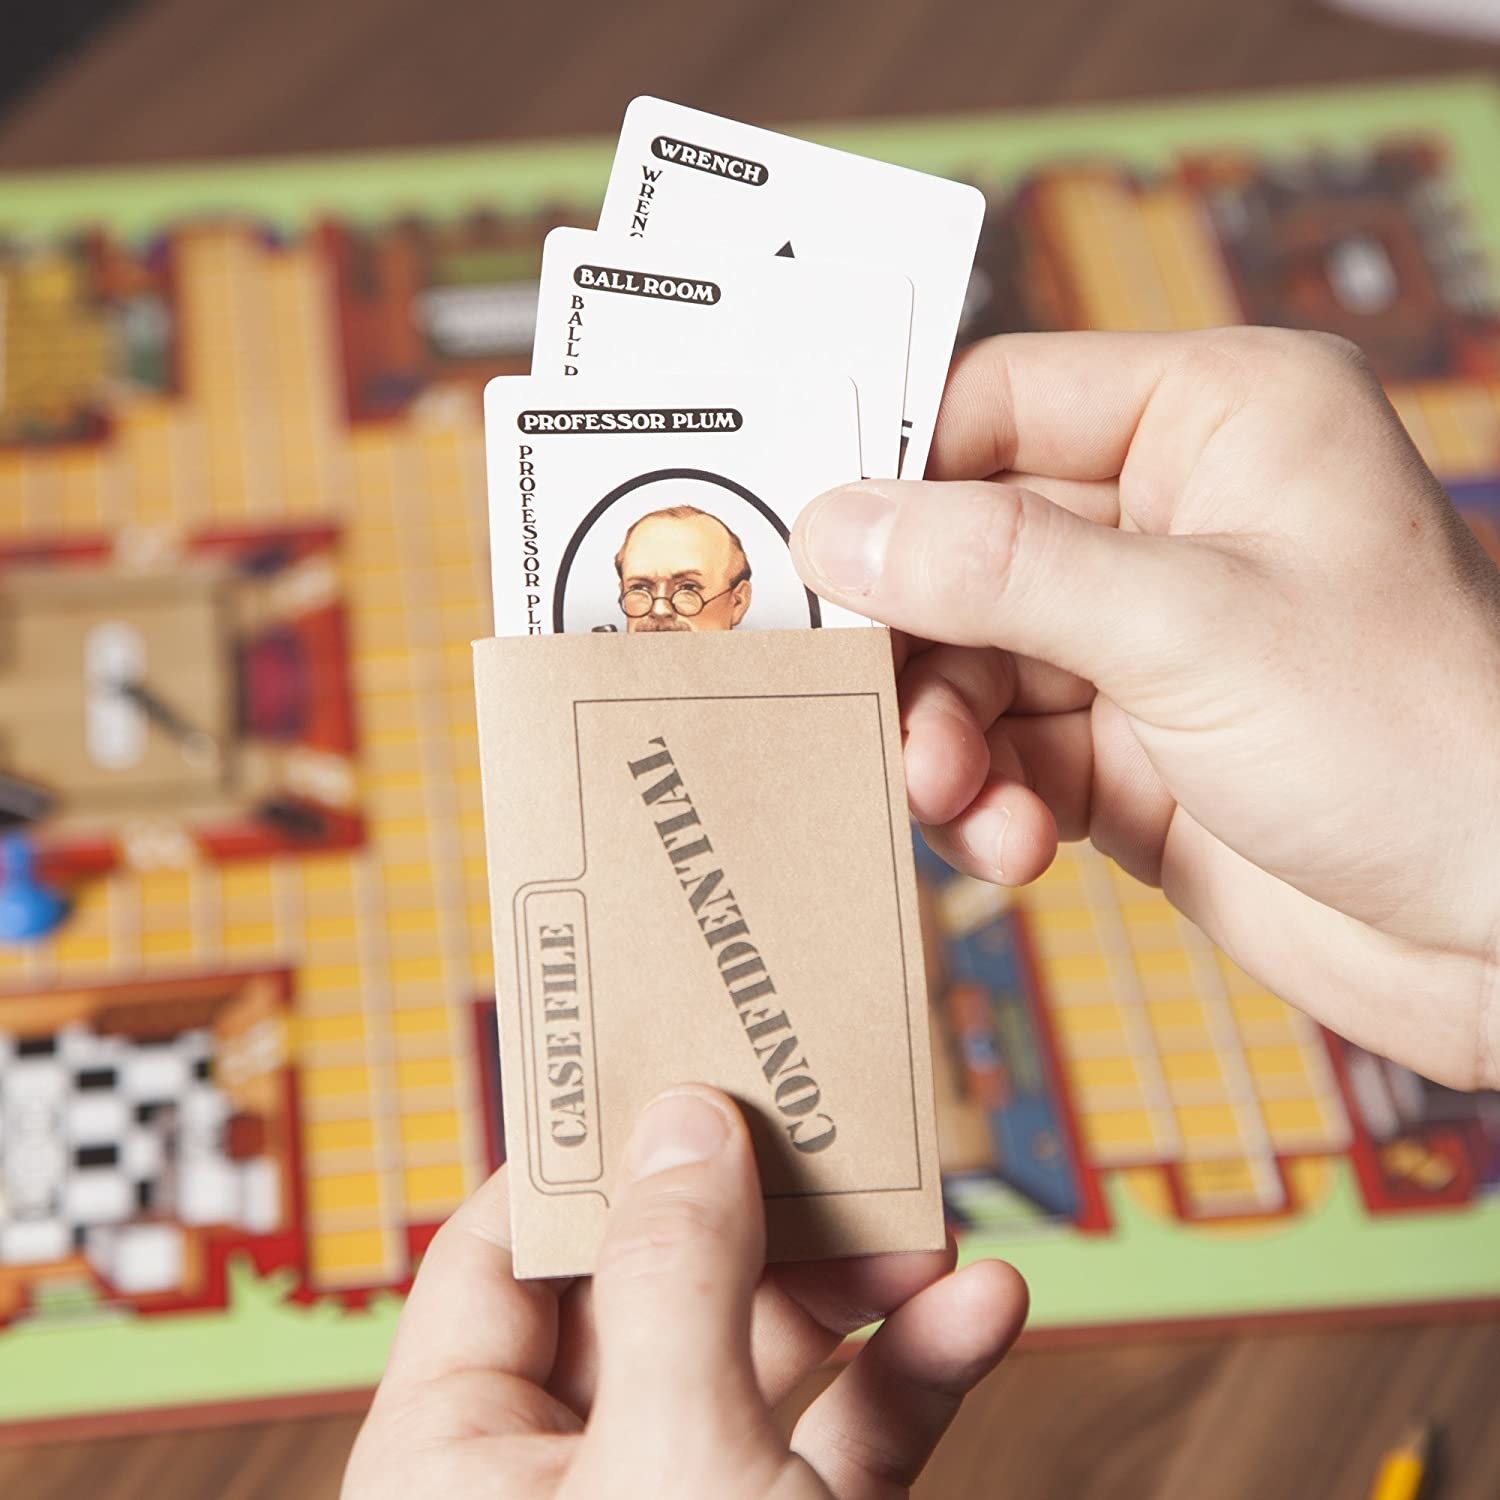 A person holding up the cards of the game over the vintage board